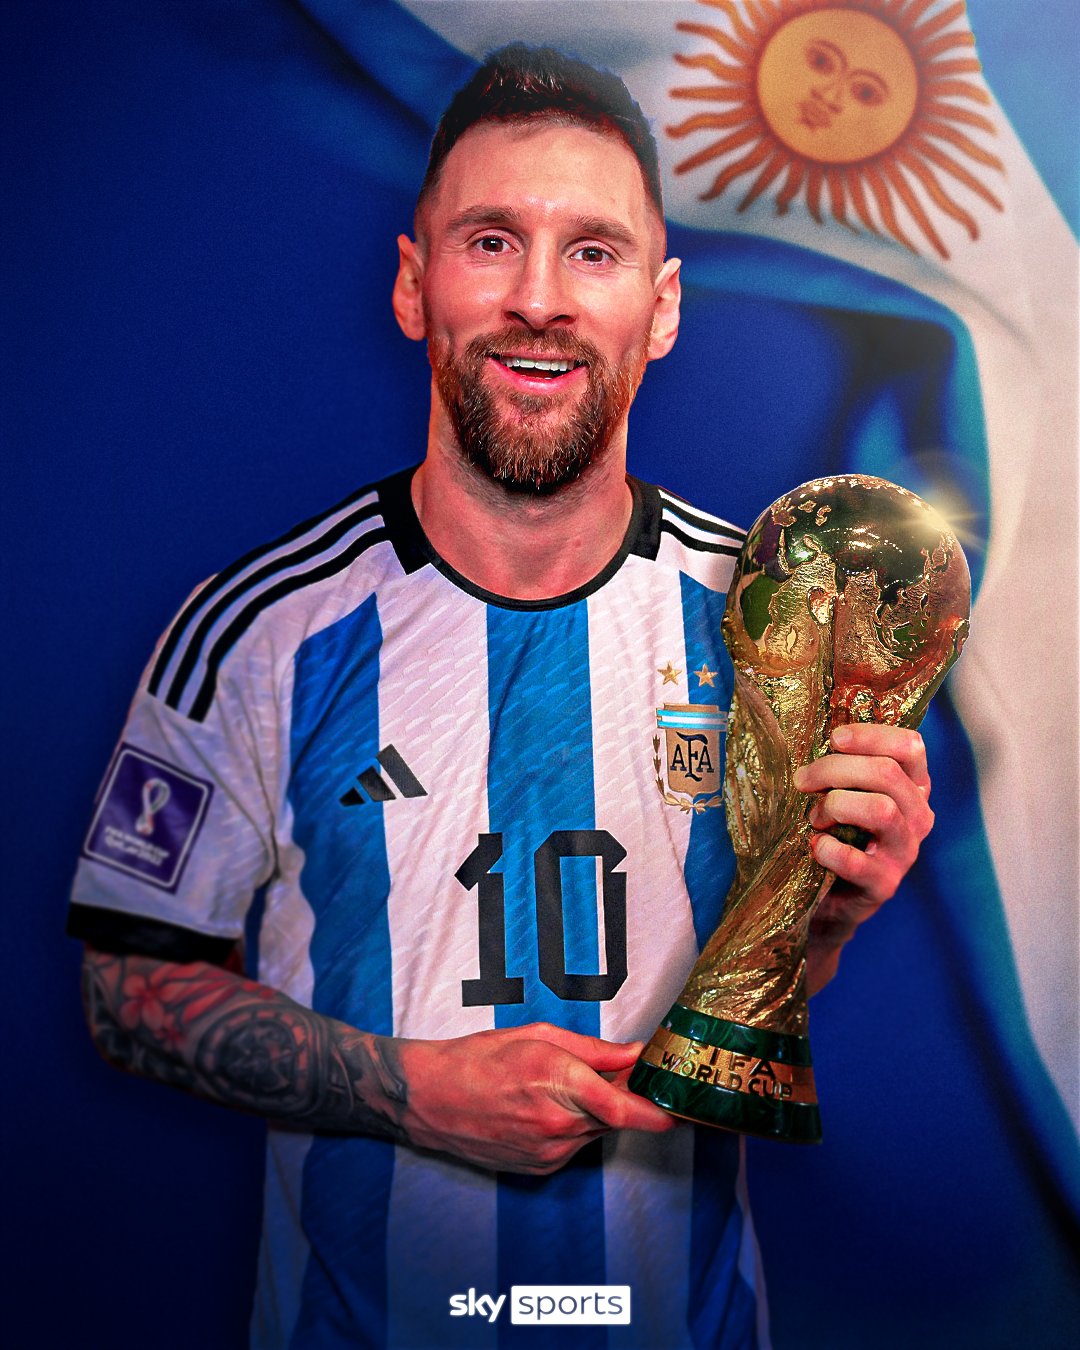 Sky Sports His Record Breaking 26th World Cup Appearance. In His Last World Cup Game. With Two Goals In The Final. Lionel Messi Finally Gets His Hands On The World